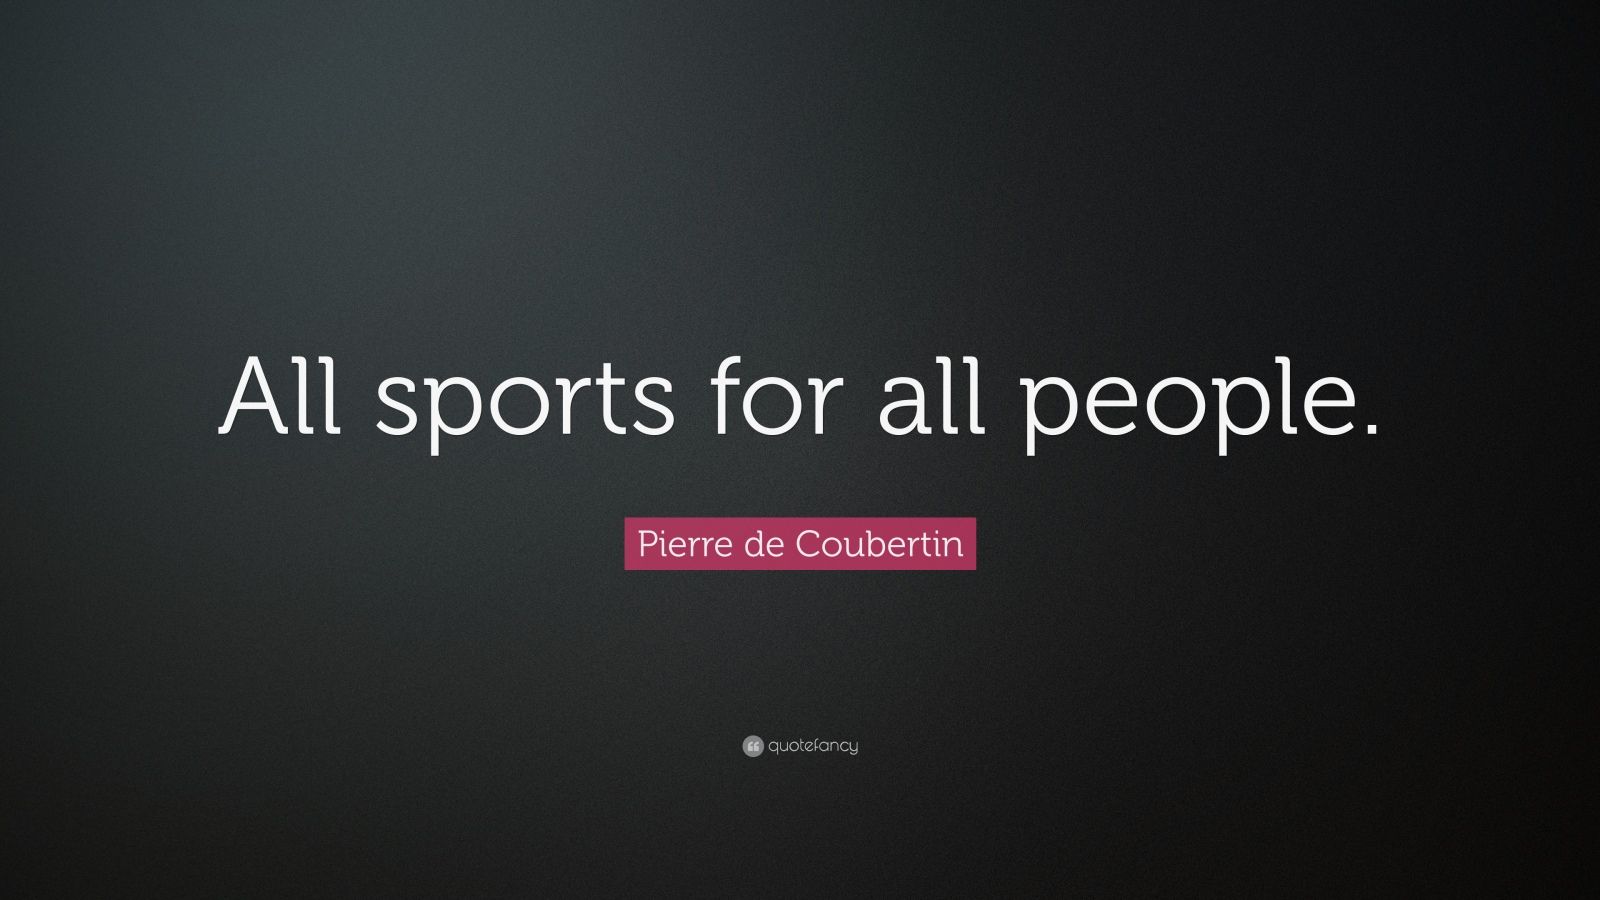 Pierre de Coubertin Quote: “All sports for all people.” (7 wallpapers